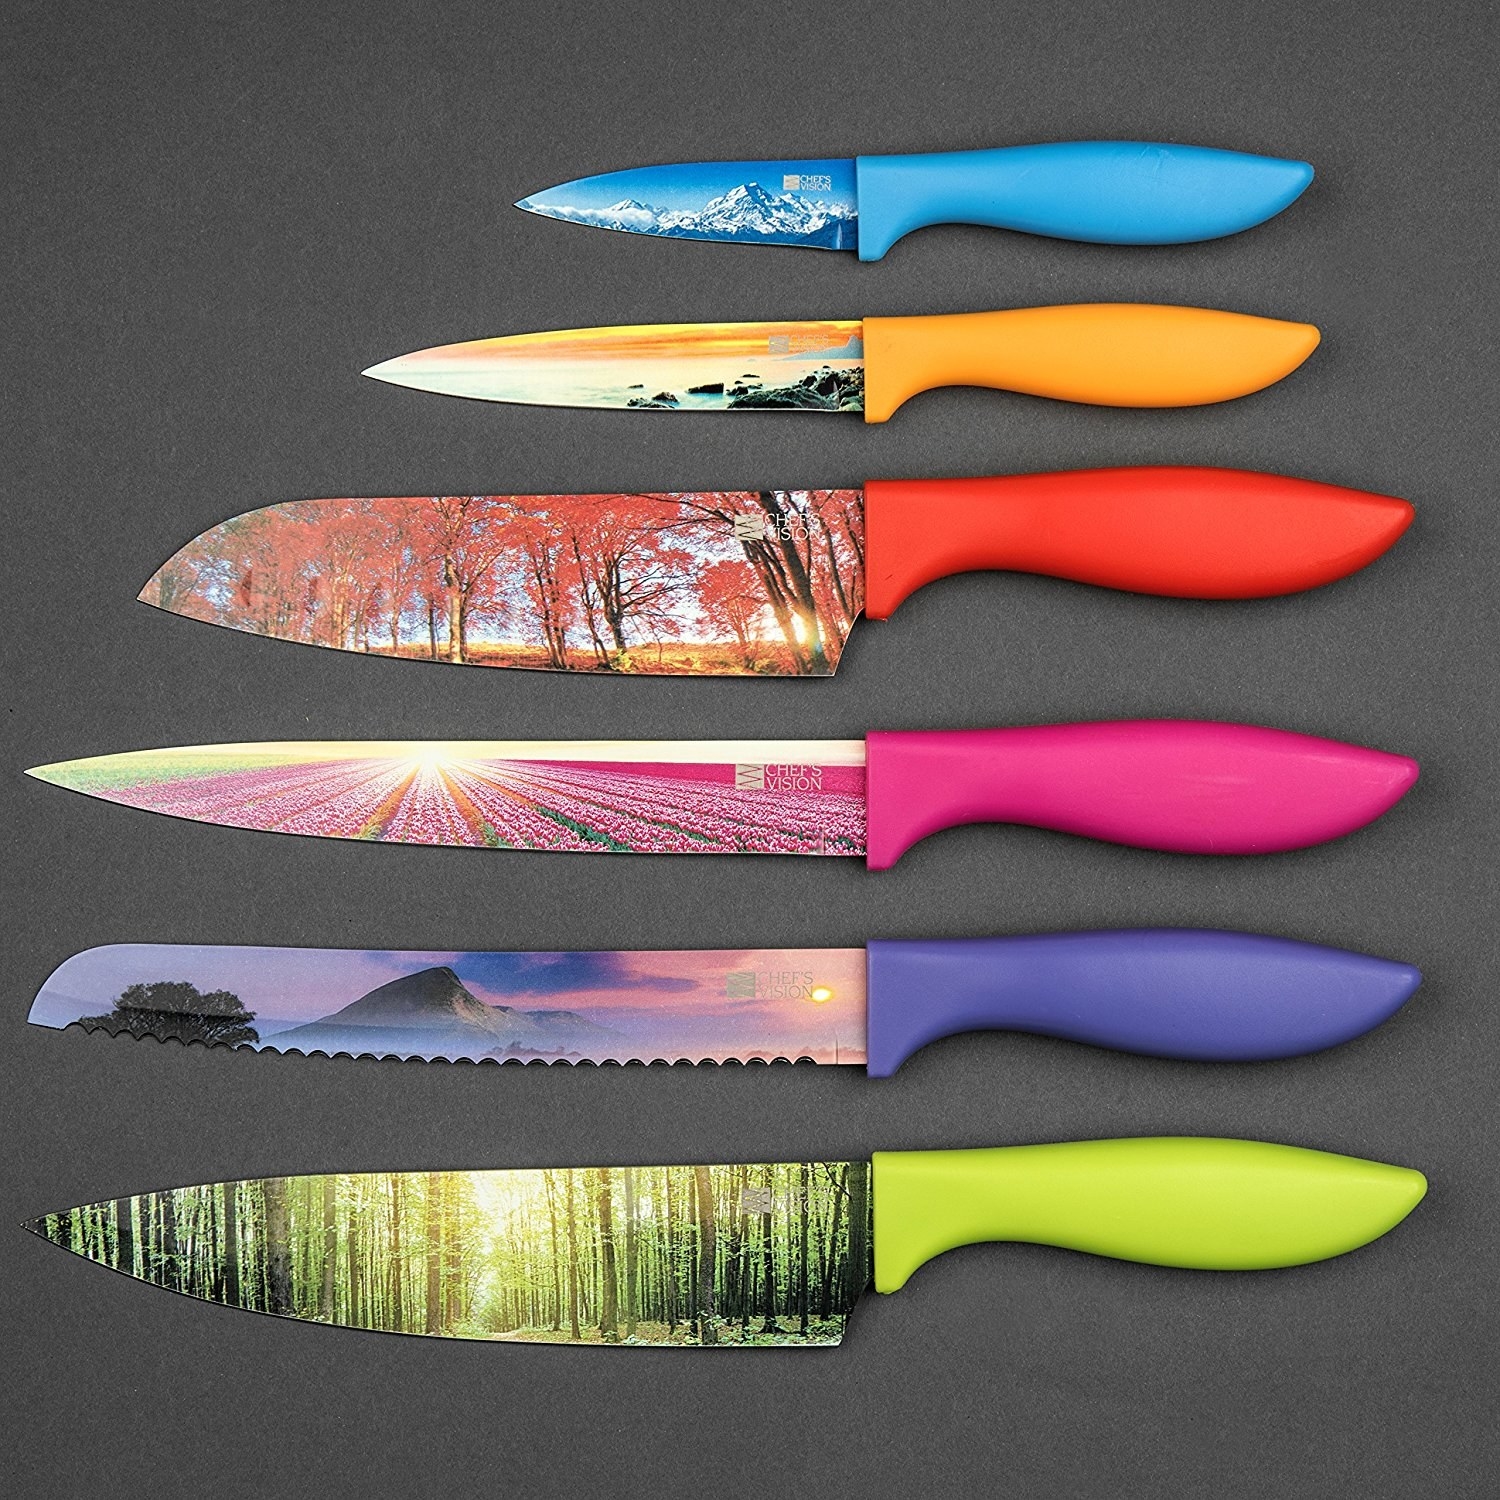 knifes with colorful handles and landscaped printed on the blades